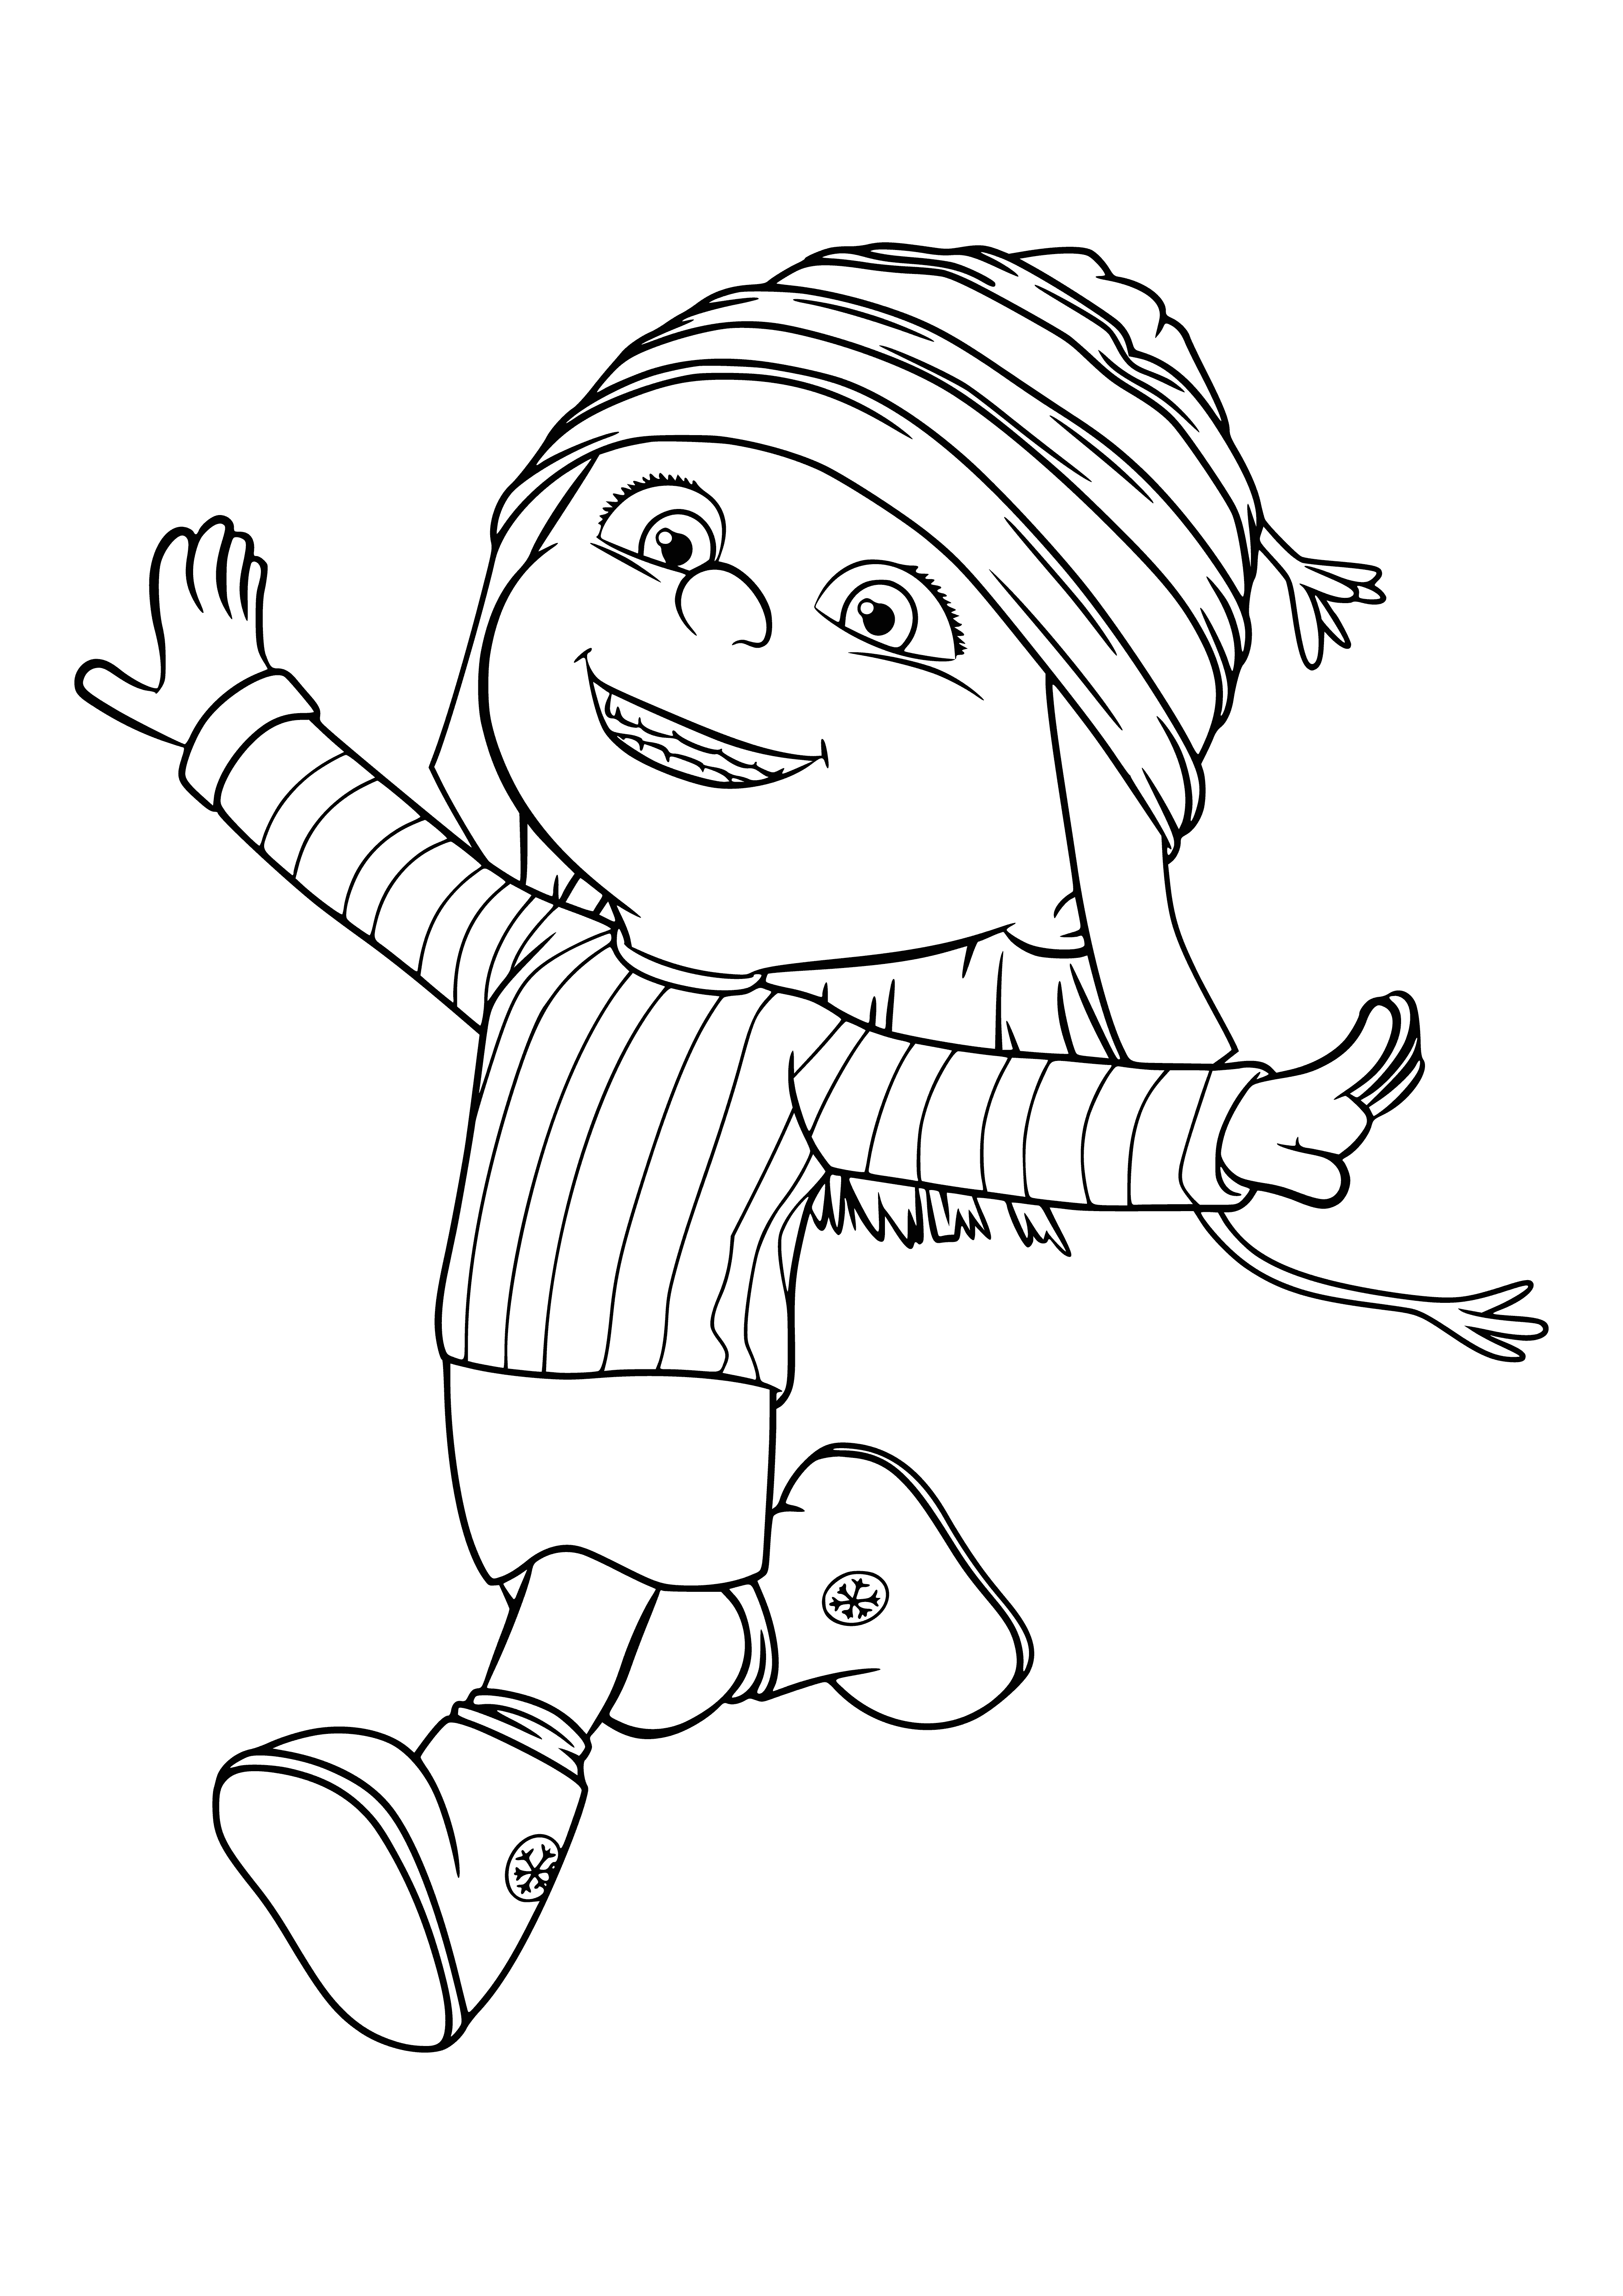 coloring page: Edith is a small brown-haired girl wearing a striped shirt and a blue backpack. Big eyes, a big head and a small mouth.